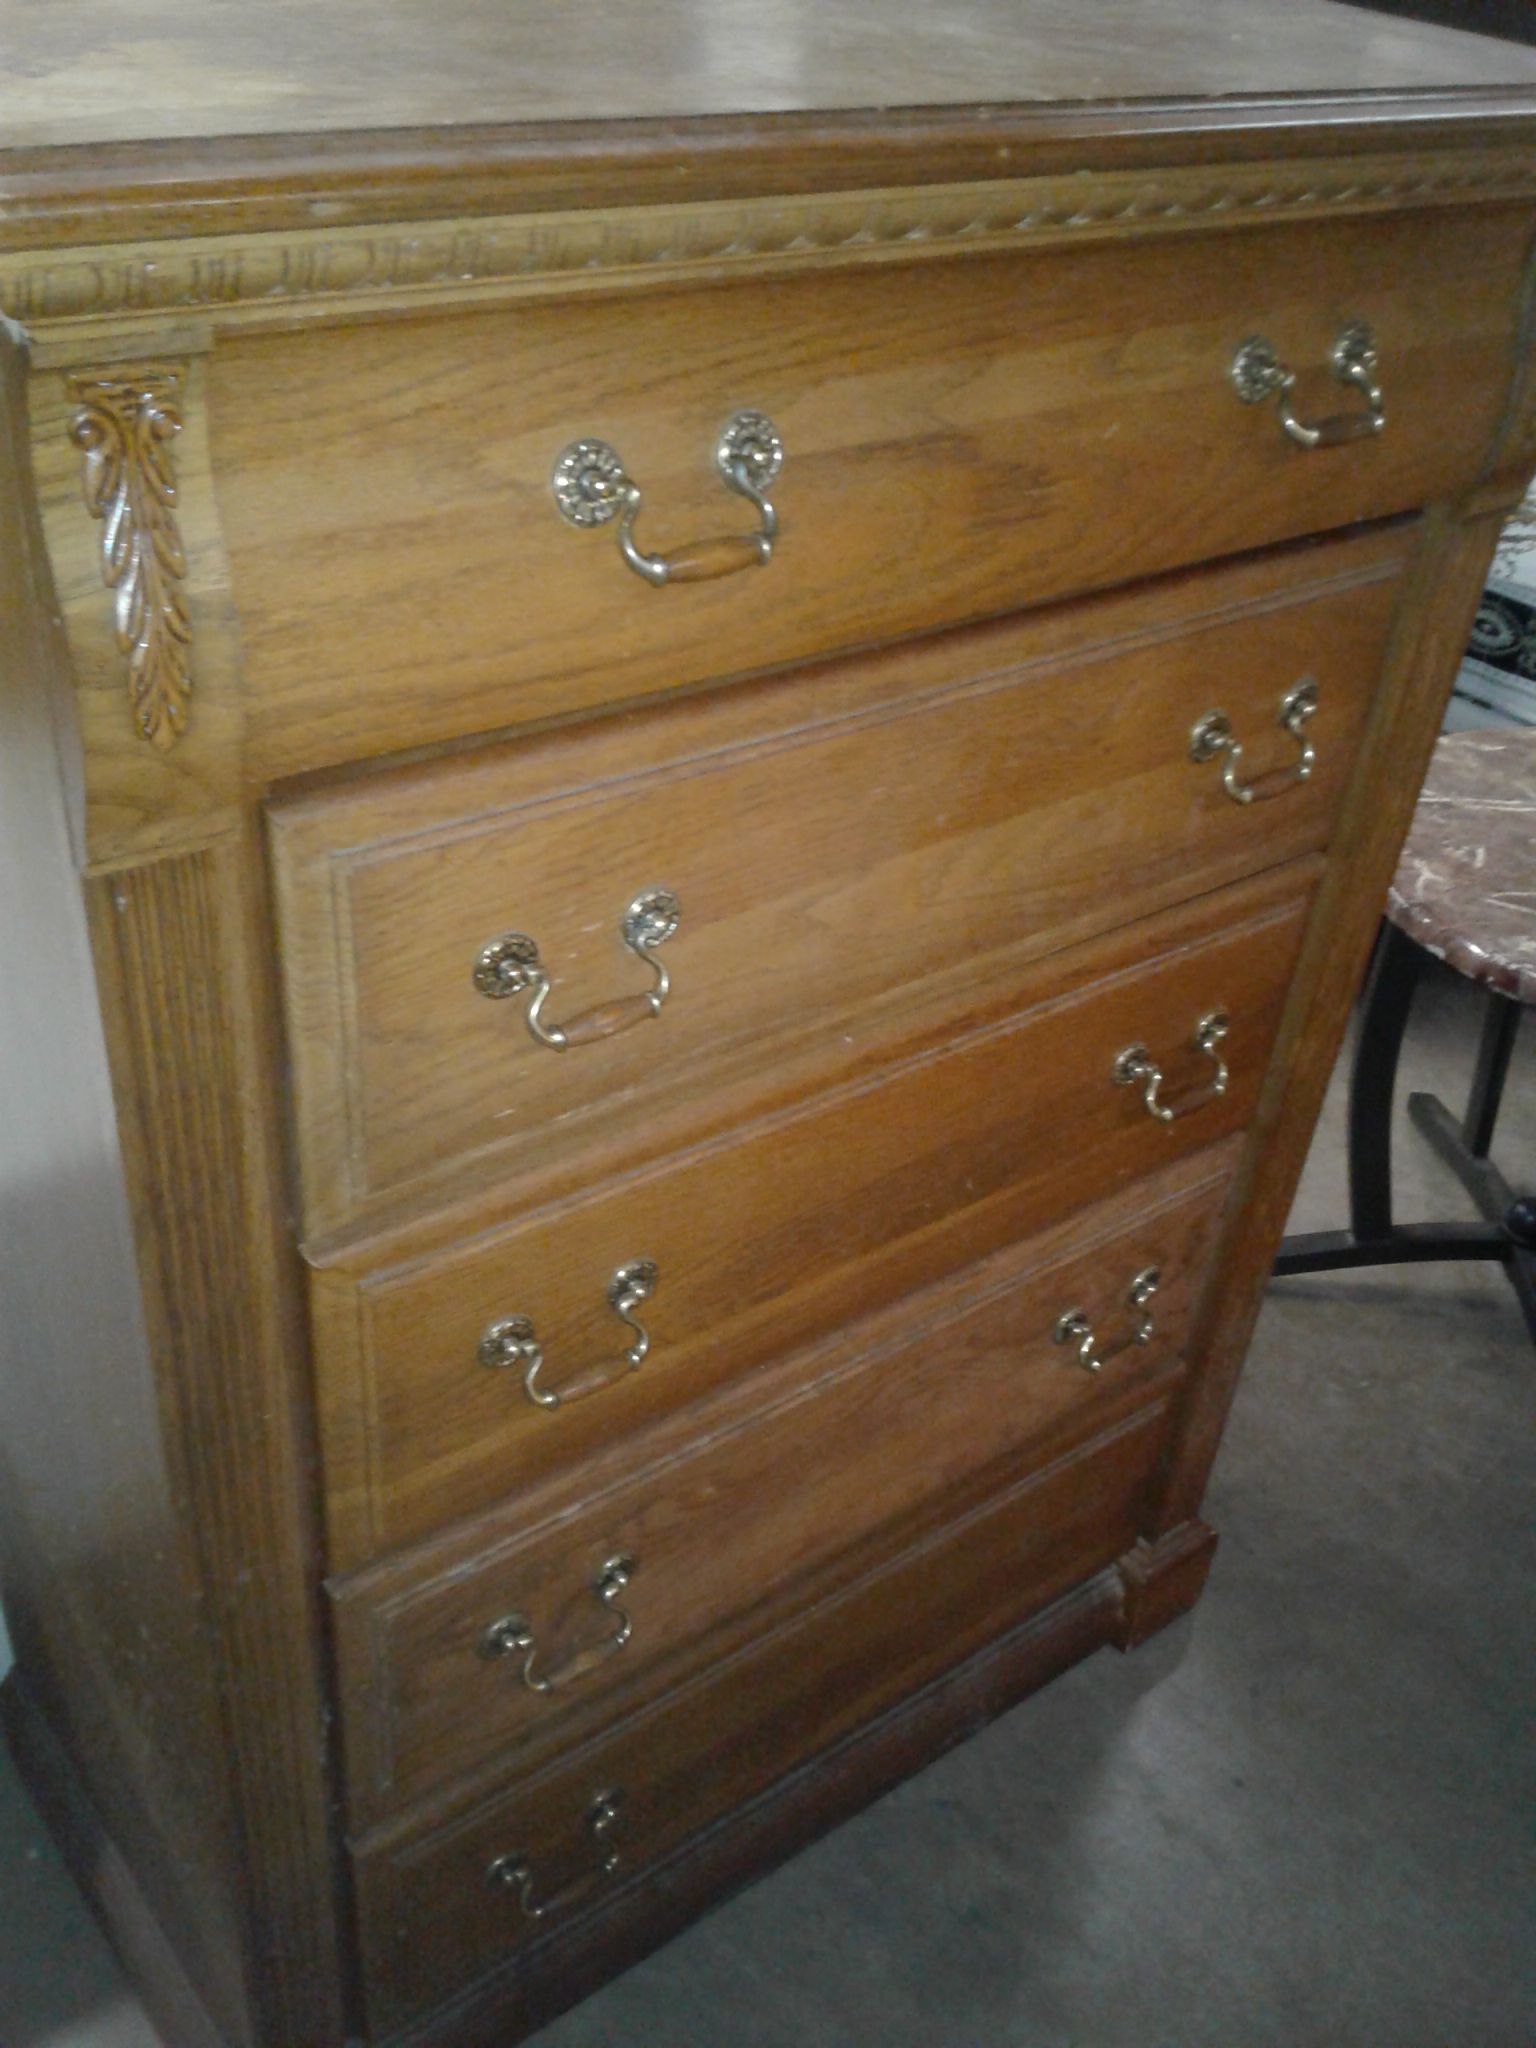 TALL CHESTER DRESSER (Real Wood)!